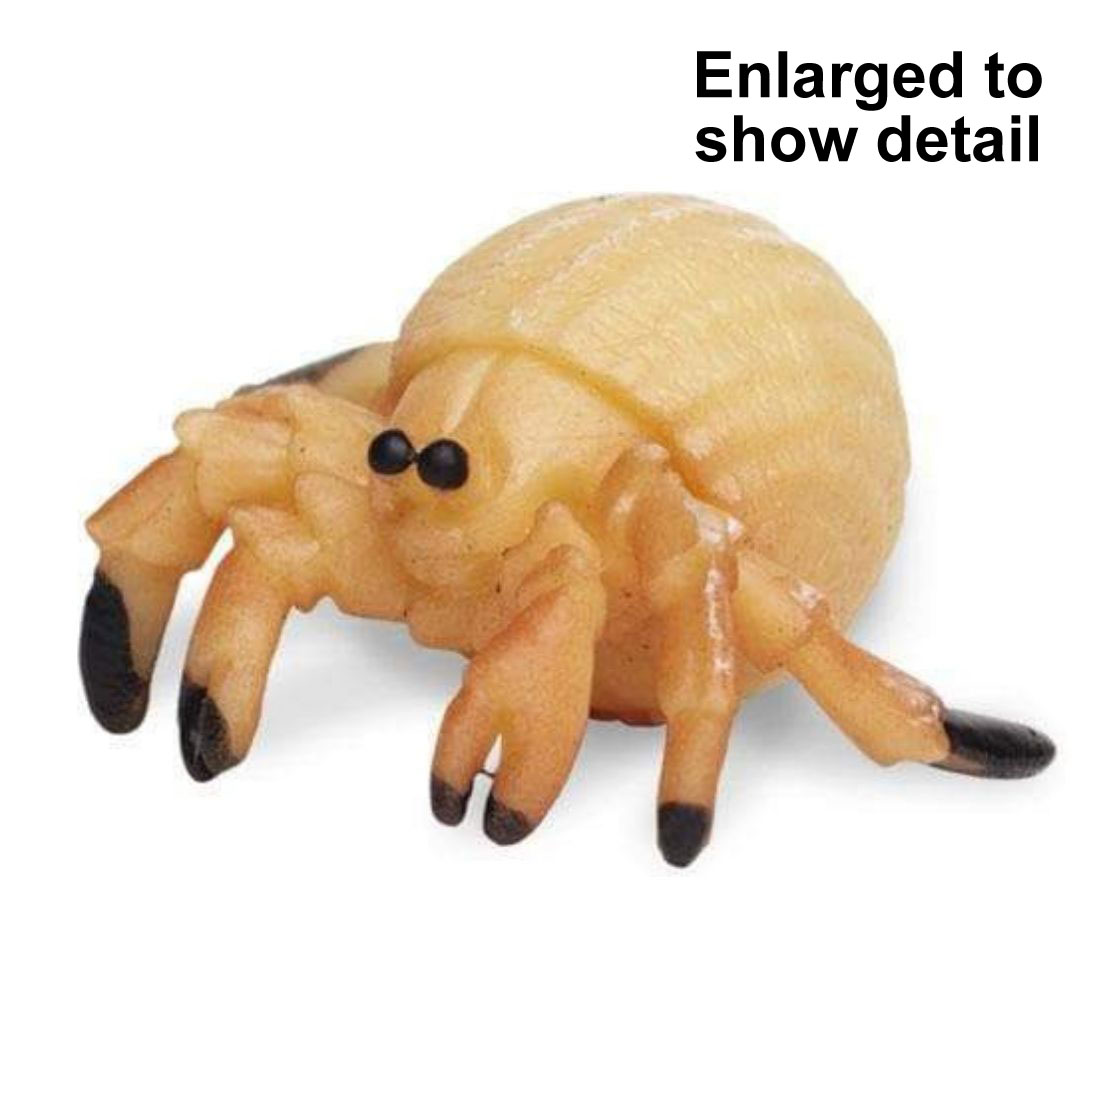 Hermit Crab Mini Figurine with the text Enlarged to Show Detail